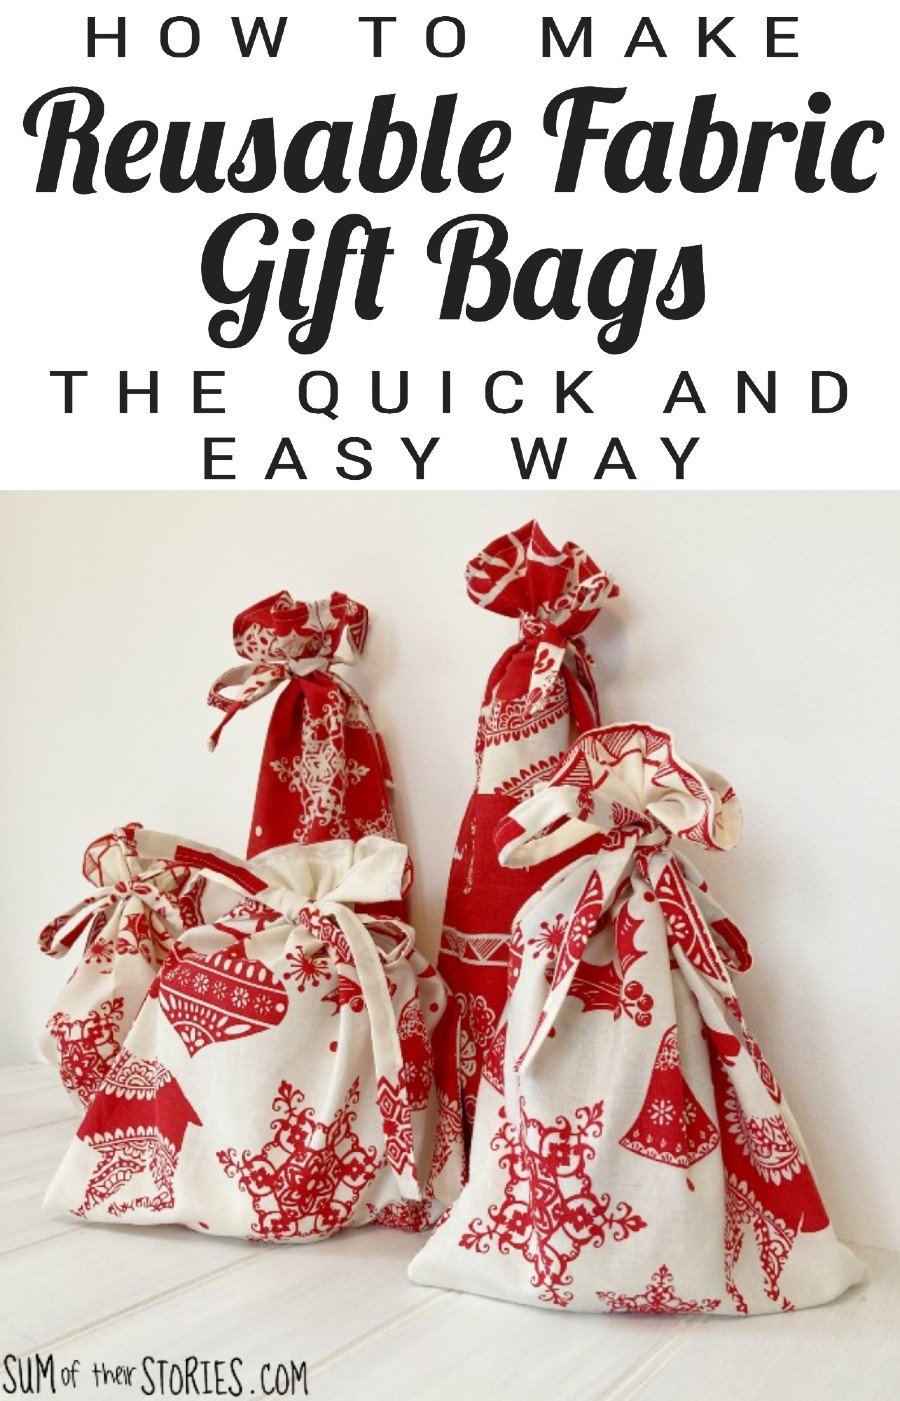 a collection of fabric reusable gift bags